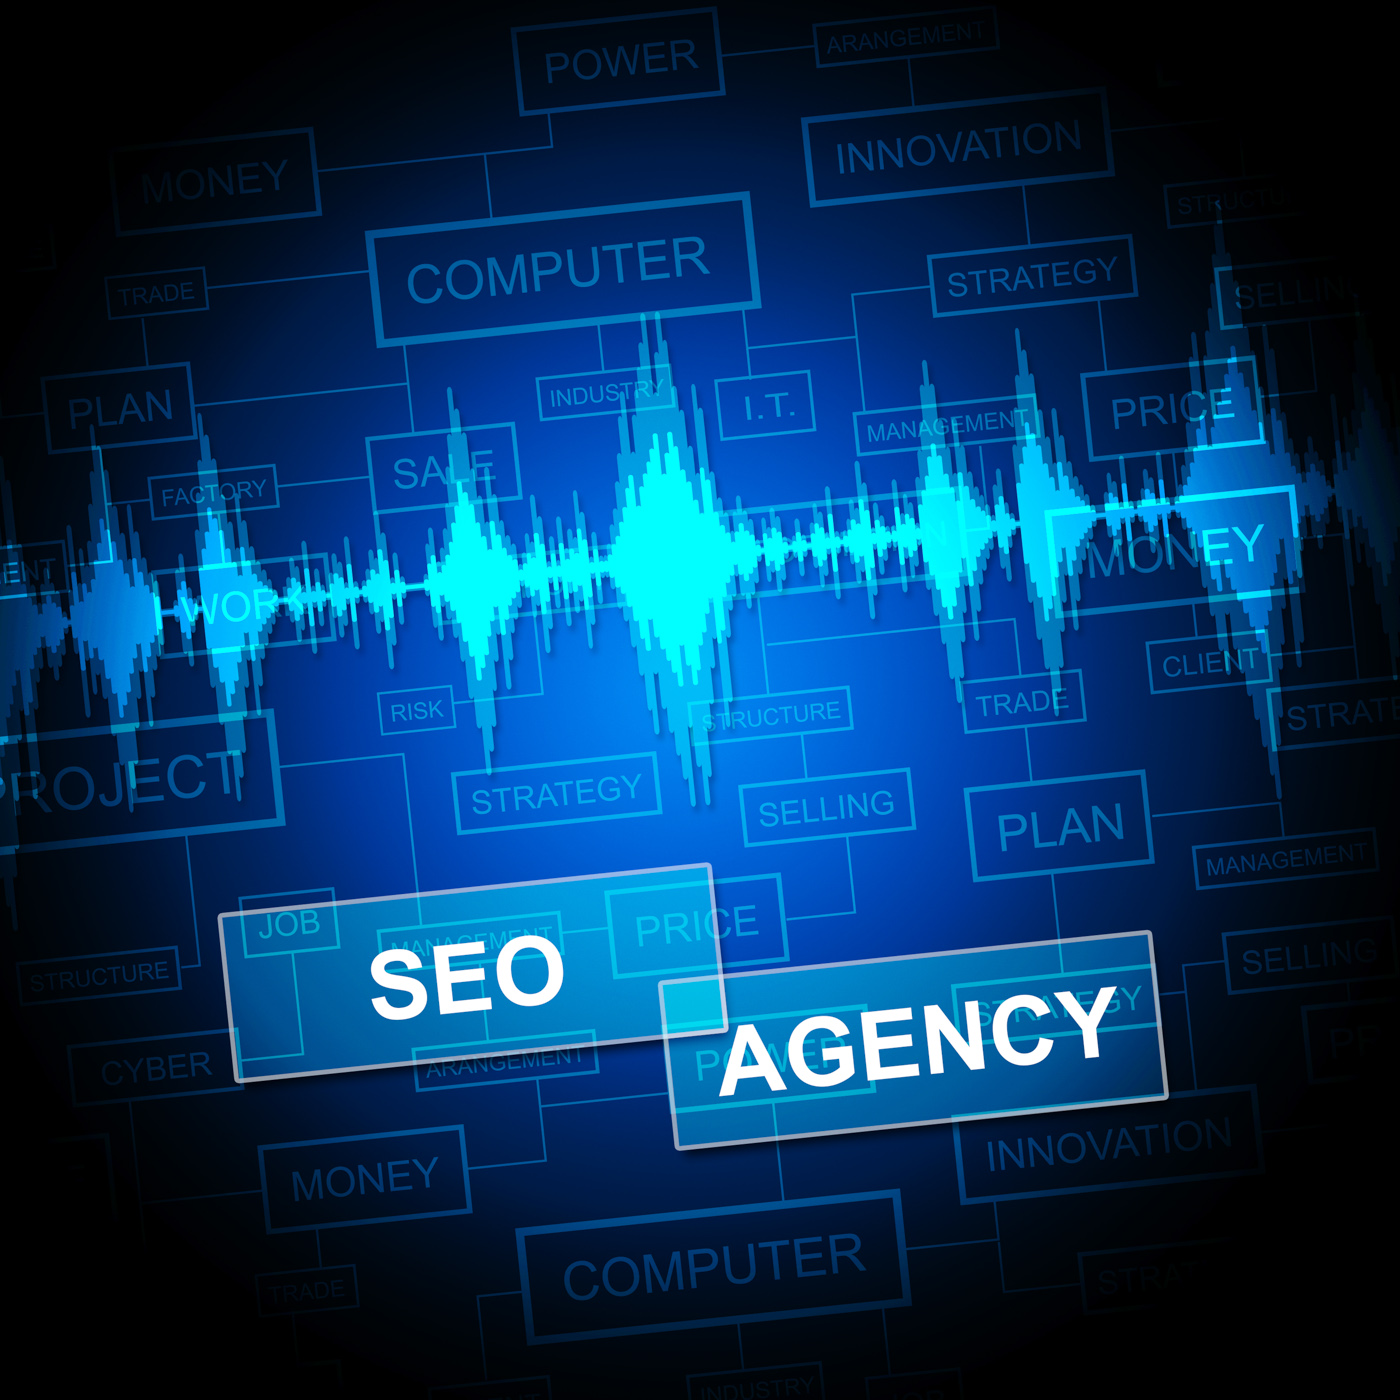 Seo agency shows search engine and agent photo